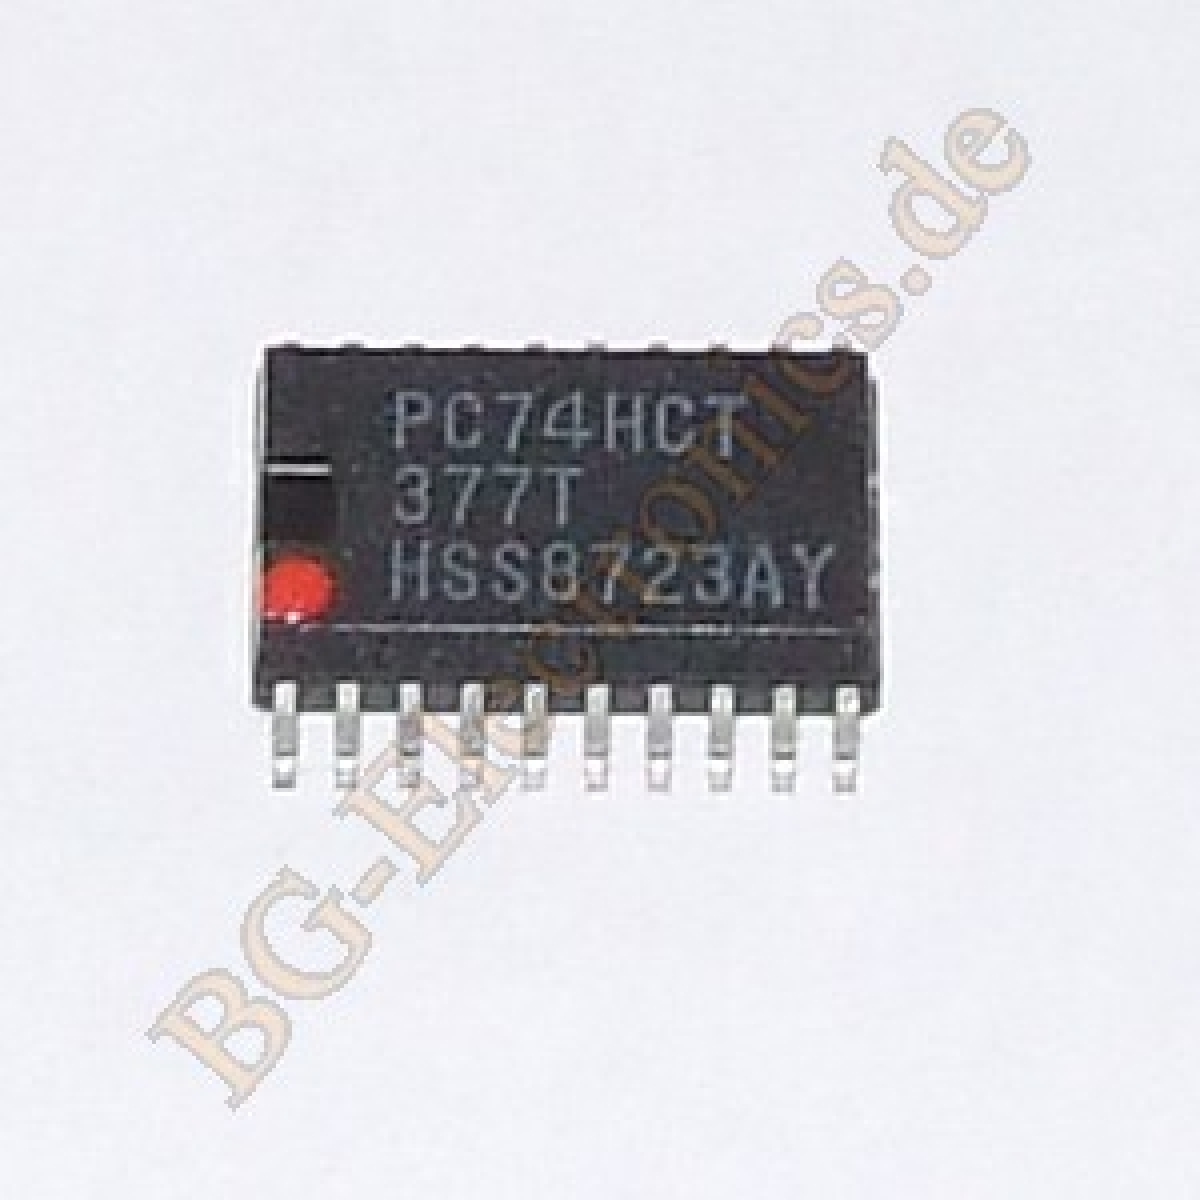 PC74HCT377T with test point